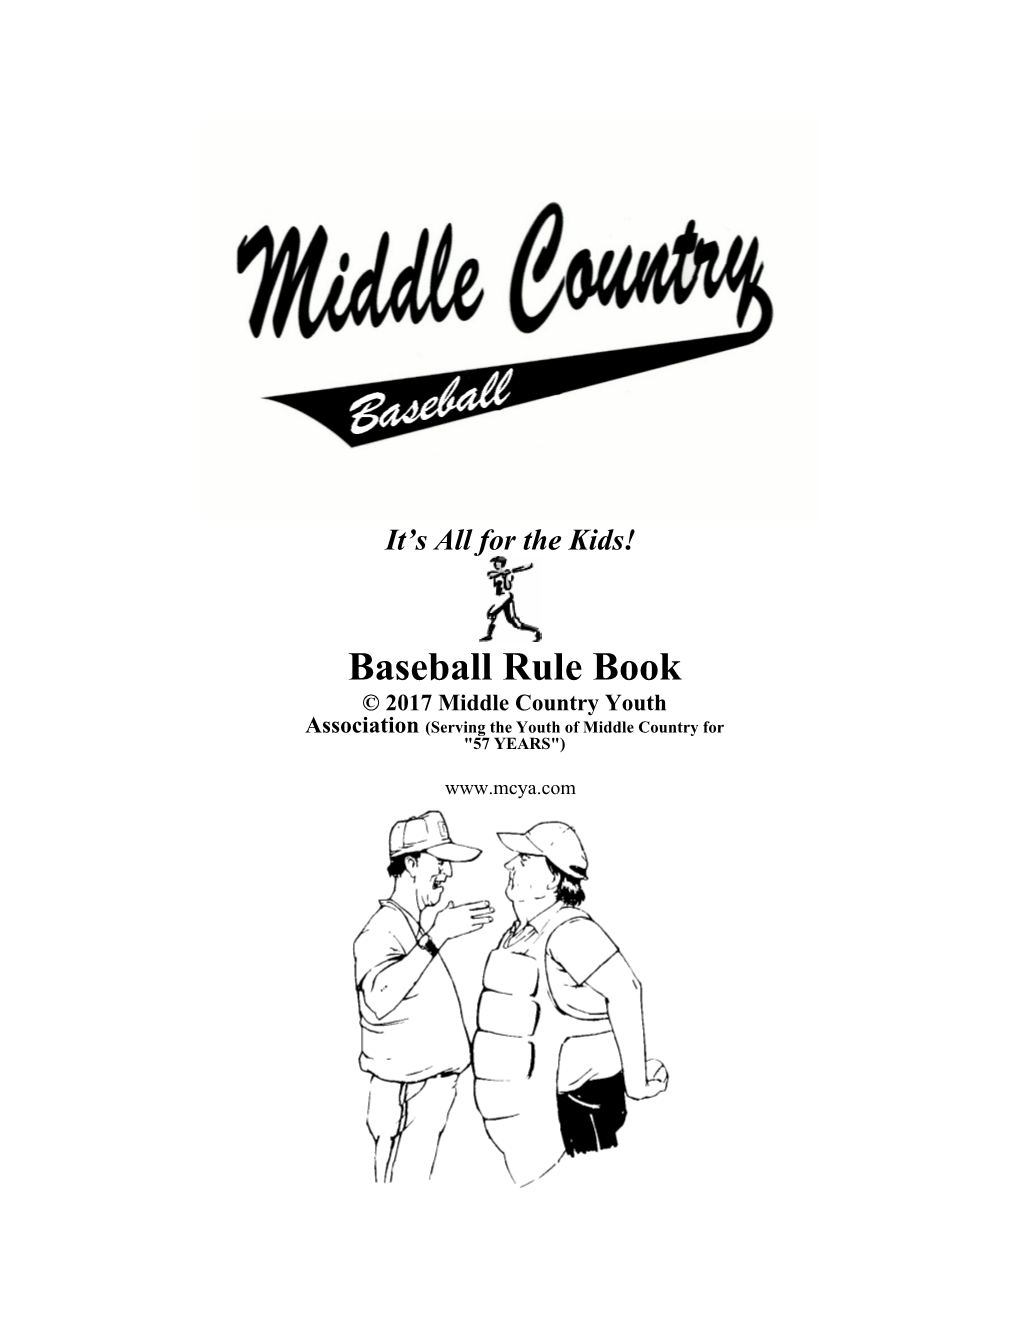 Baseball Rule Book © 2017 Middle Country Youth Association (Serving the Youth of Middle Country for "57 YEARS")